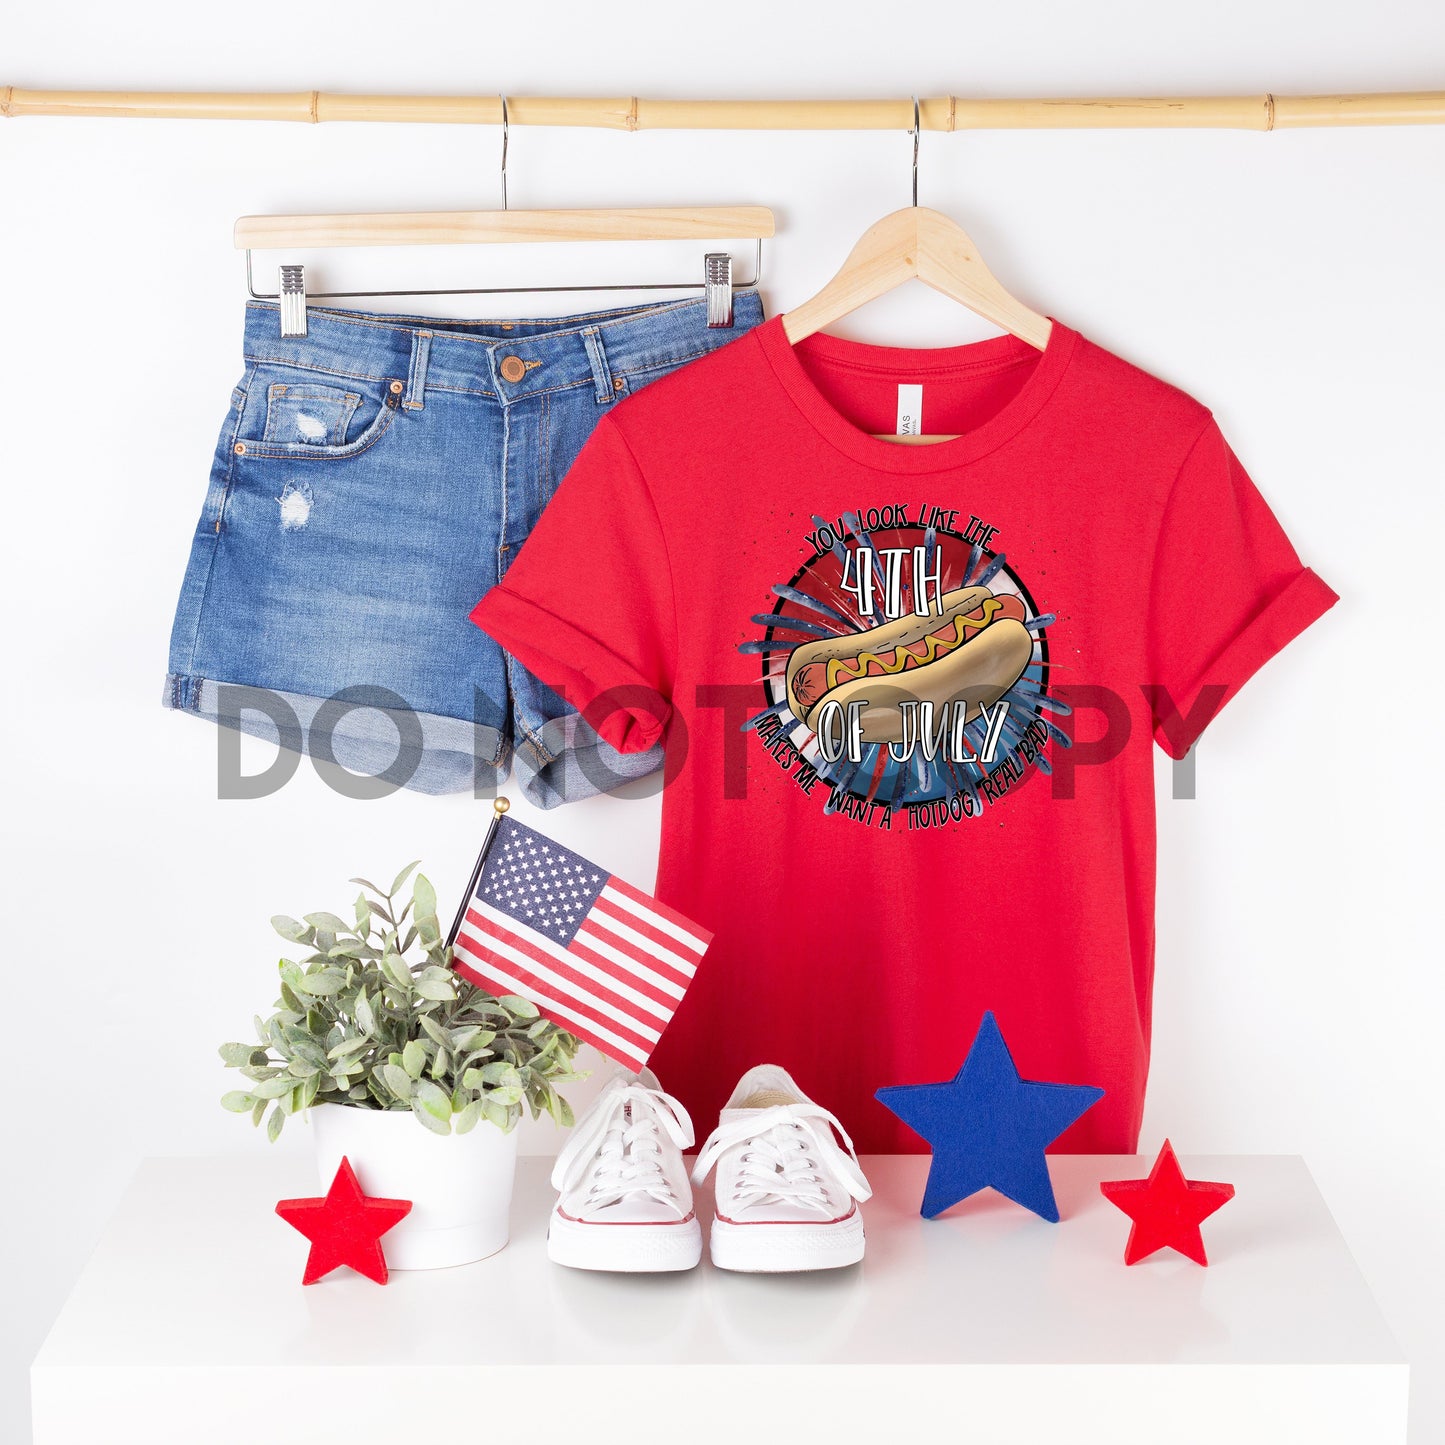 You look like the 4th of July, makes me want a hot dog real bad HIGH HEAT Full color Screen Print transfer